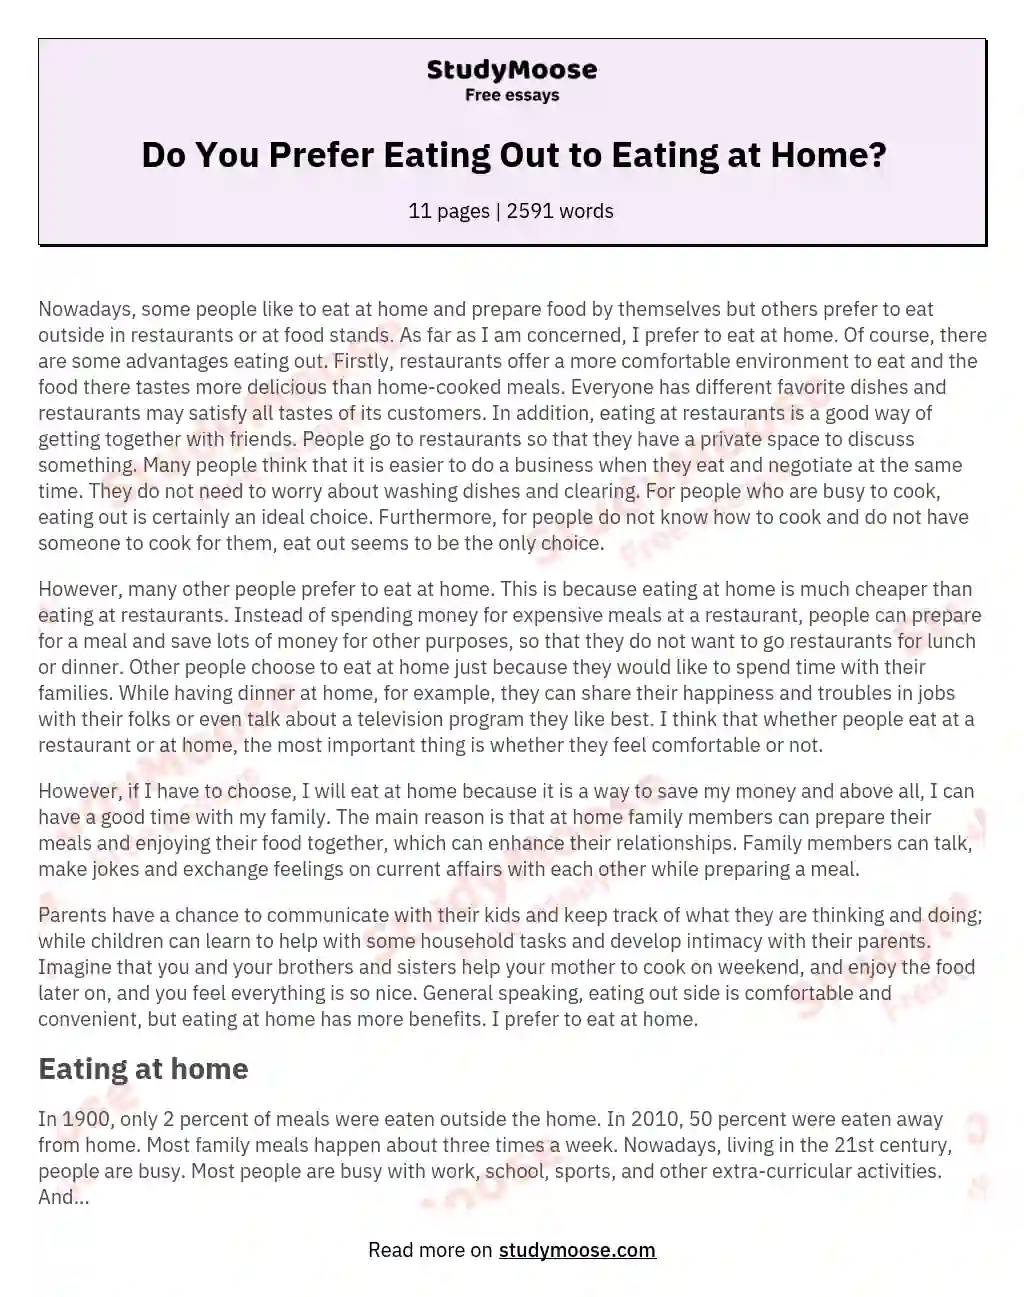 Do You Prefer Eating Out to Eating at Home? essay